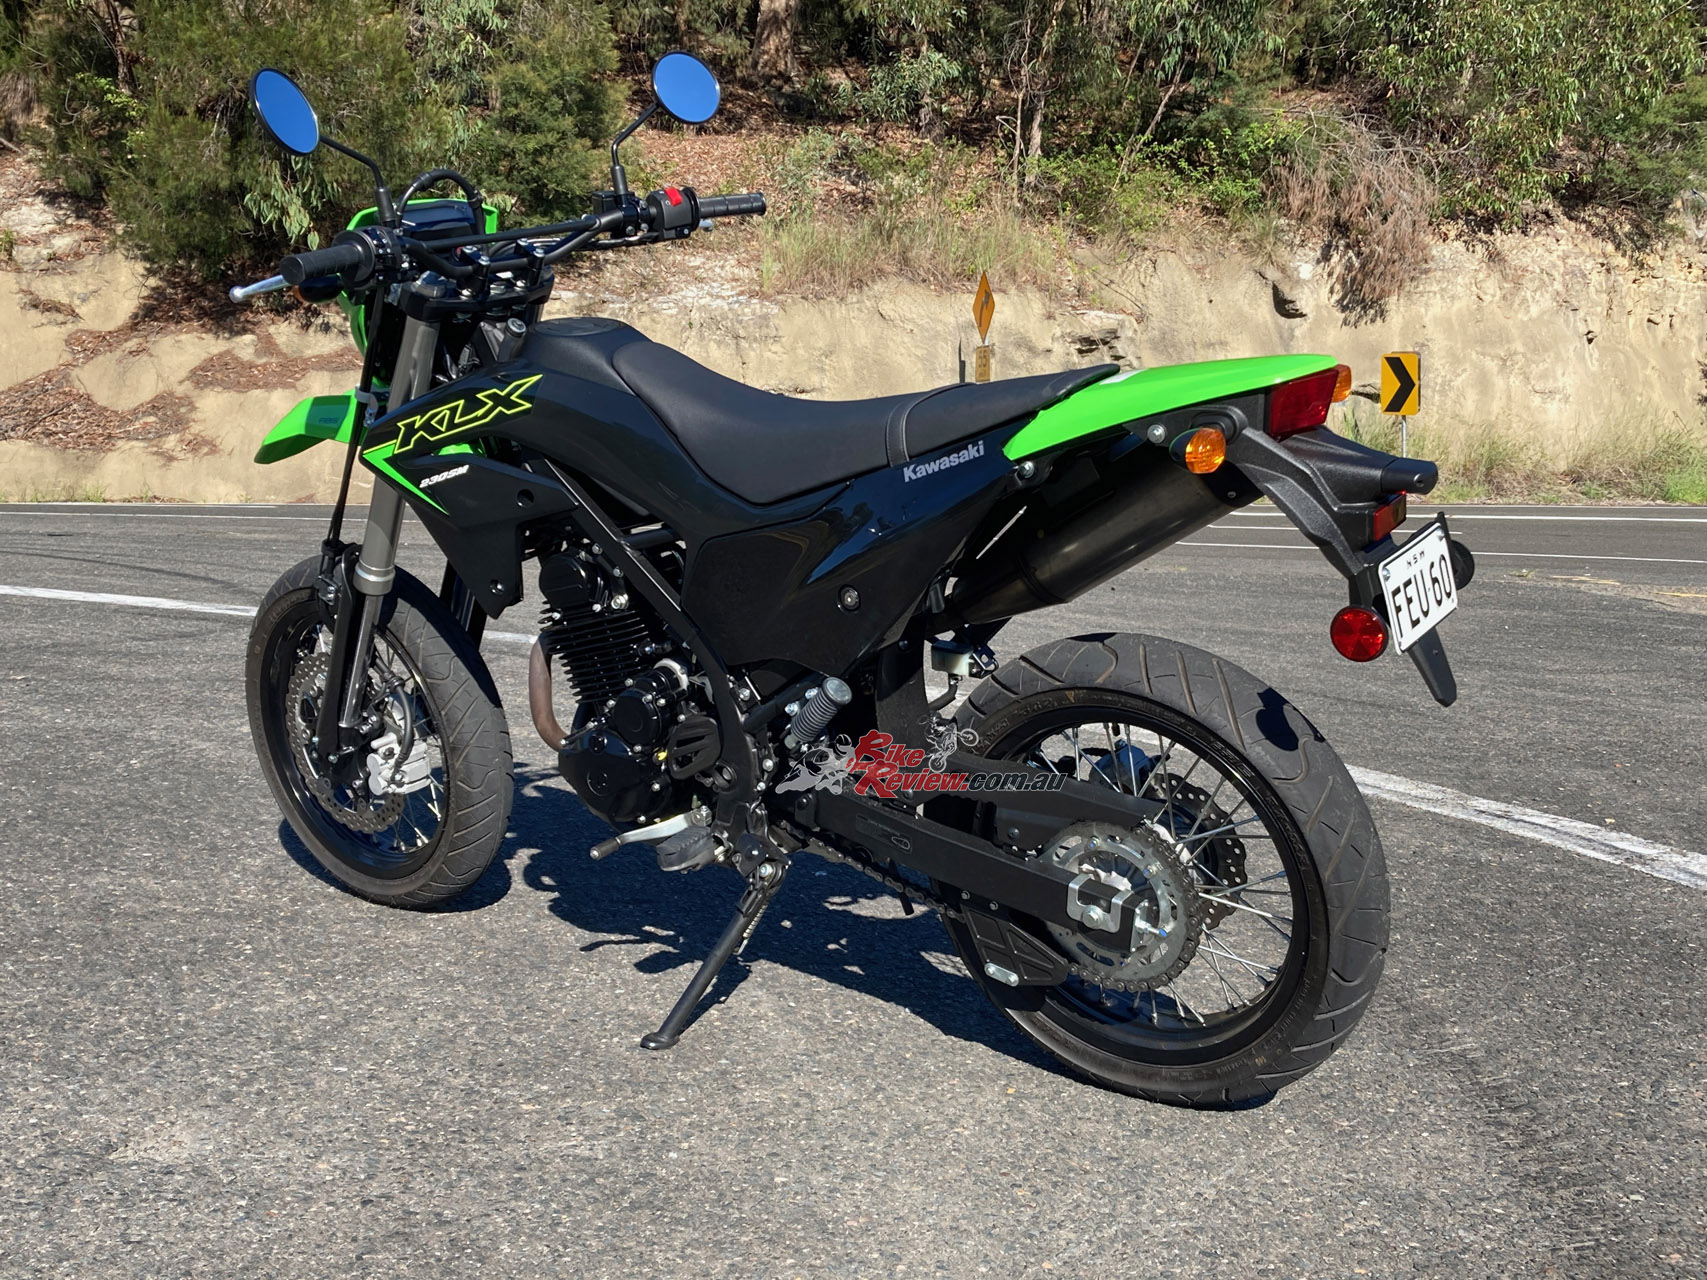 An alternative to the usual off-road, nakedbikes, cruisers or sports styled LAMS machines. The KLX is neat and has some character to it.